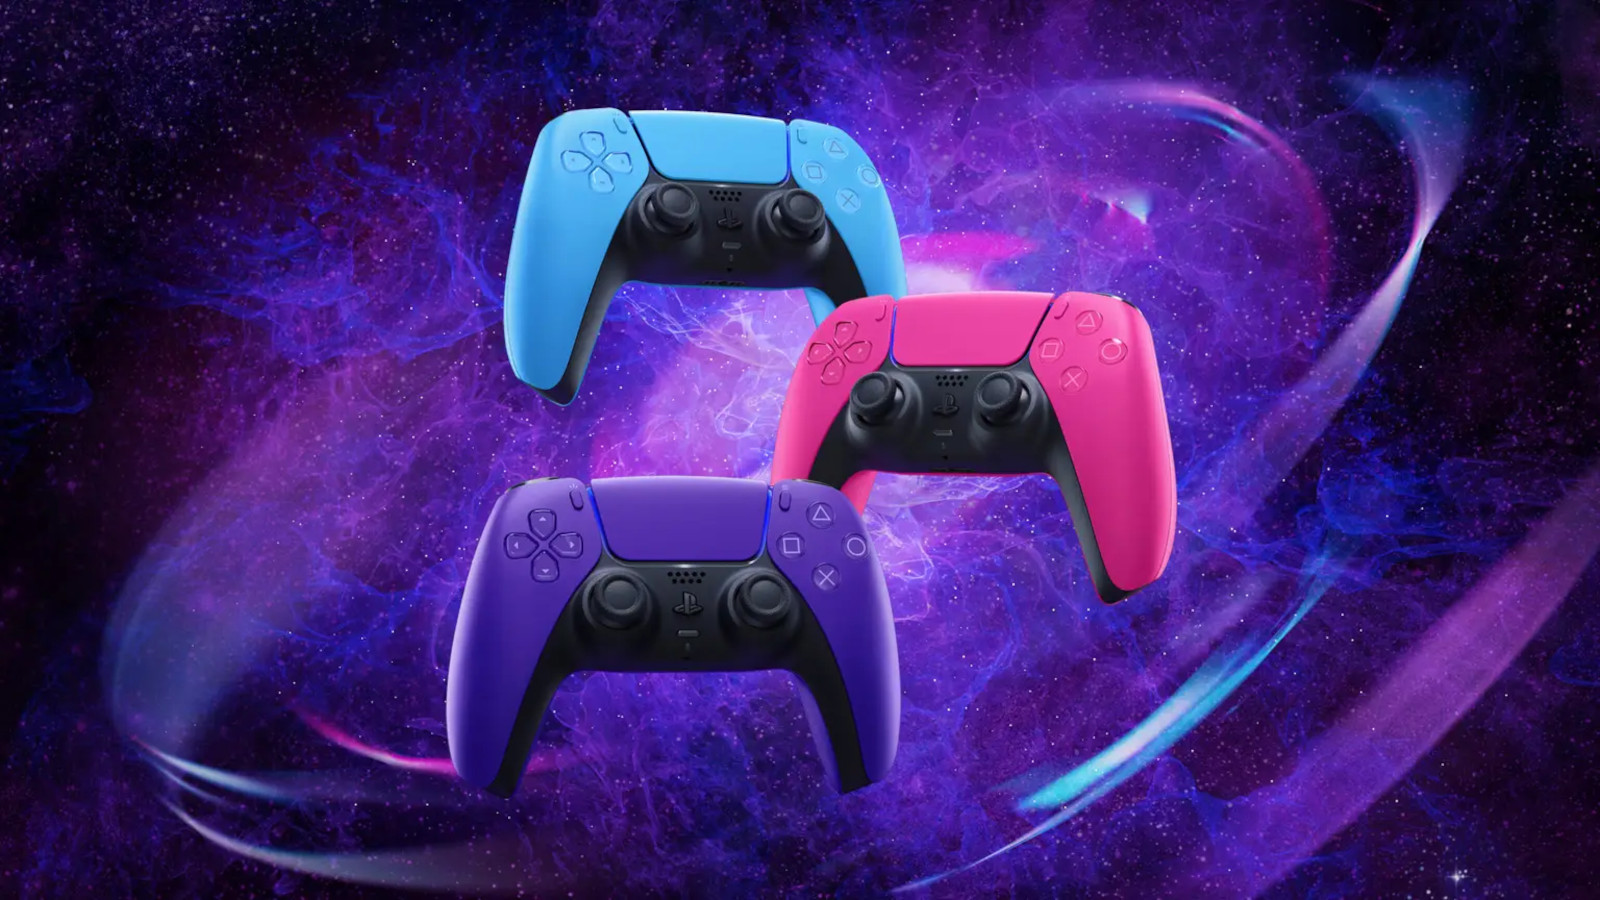 Blue, pink and purple Sony DualSense controllers for the PS5 against a galaxy backdrop